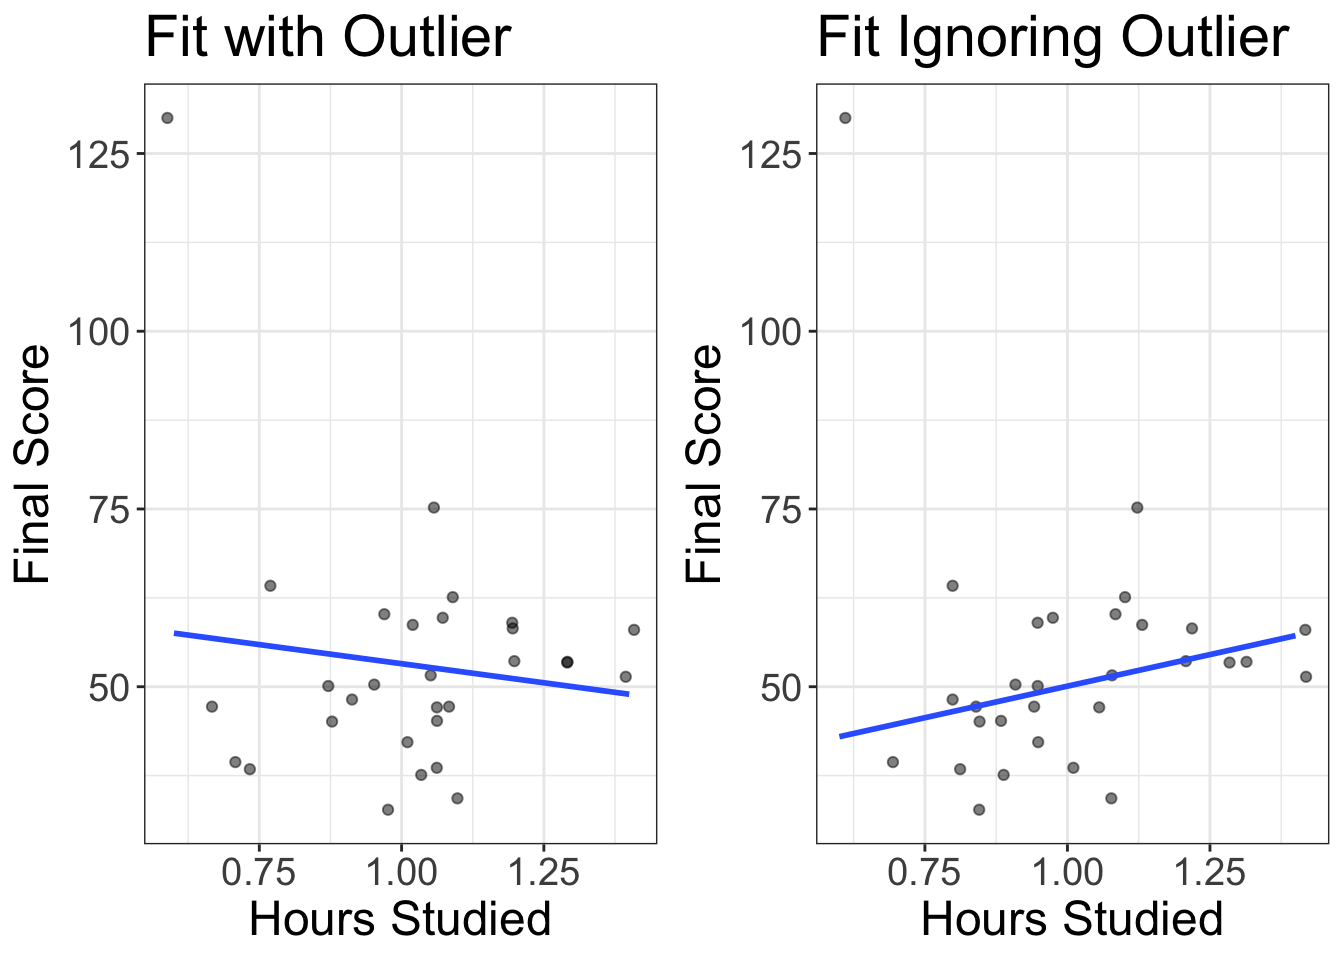 For larger datasets, outliers have a much smaller effect on the fitted line, i.e., the outliers are less influential.